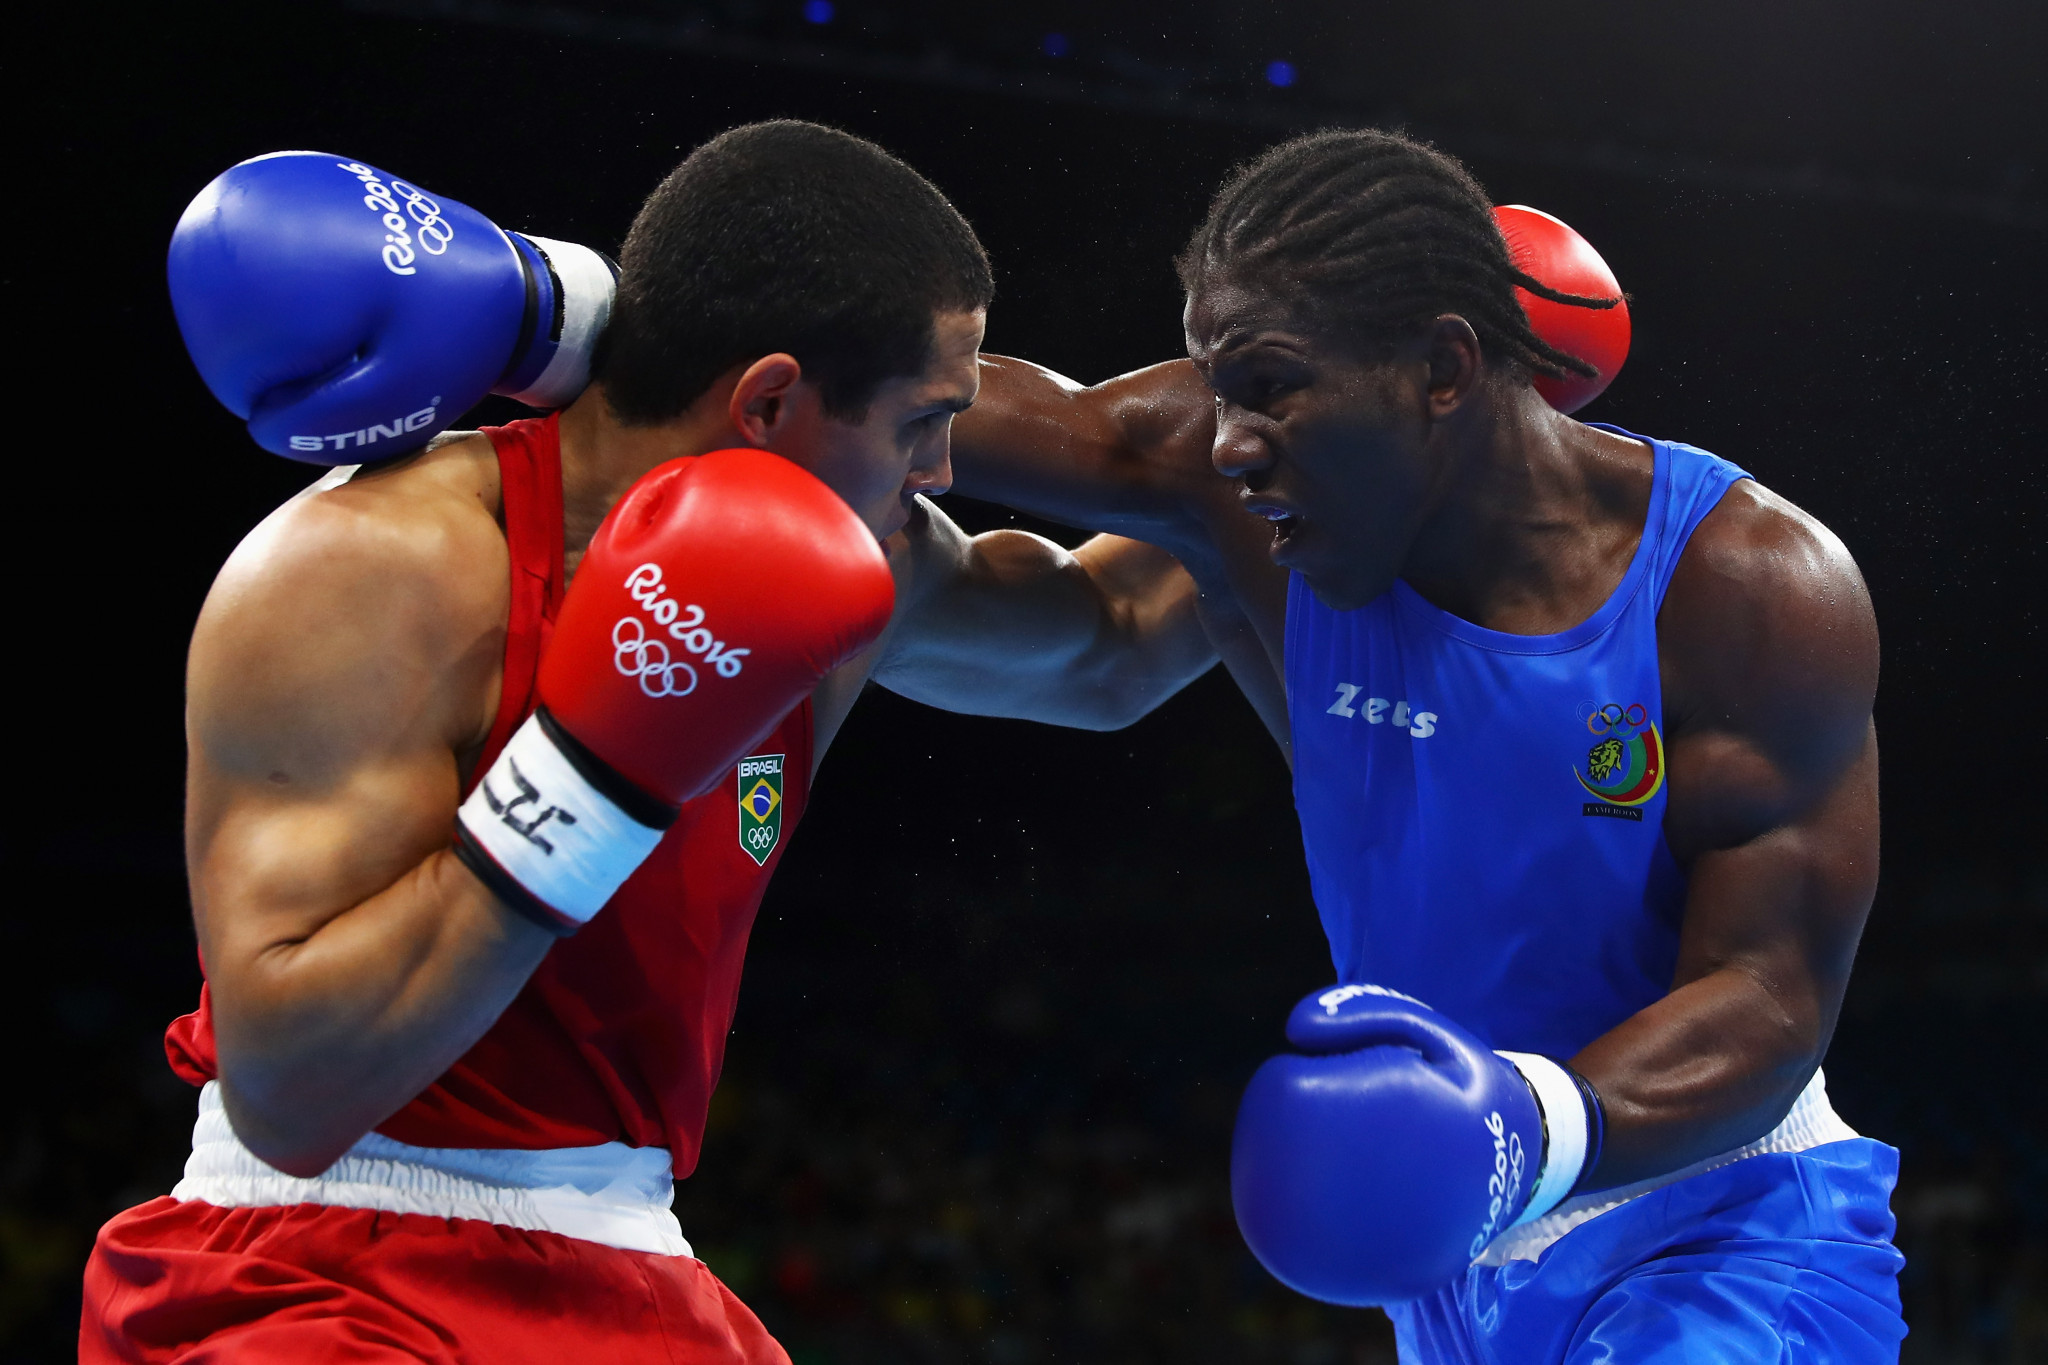 Cameroon's Hassan N'Dam N'Jikam was one of the few professionals to fight in the Olympics at Rio 2016 but was beaten in the first round by Brazil's Michel Borges  ©Getty Images